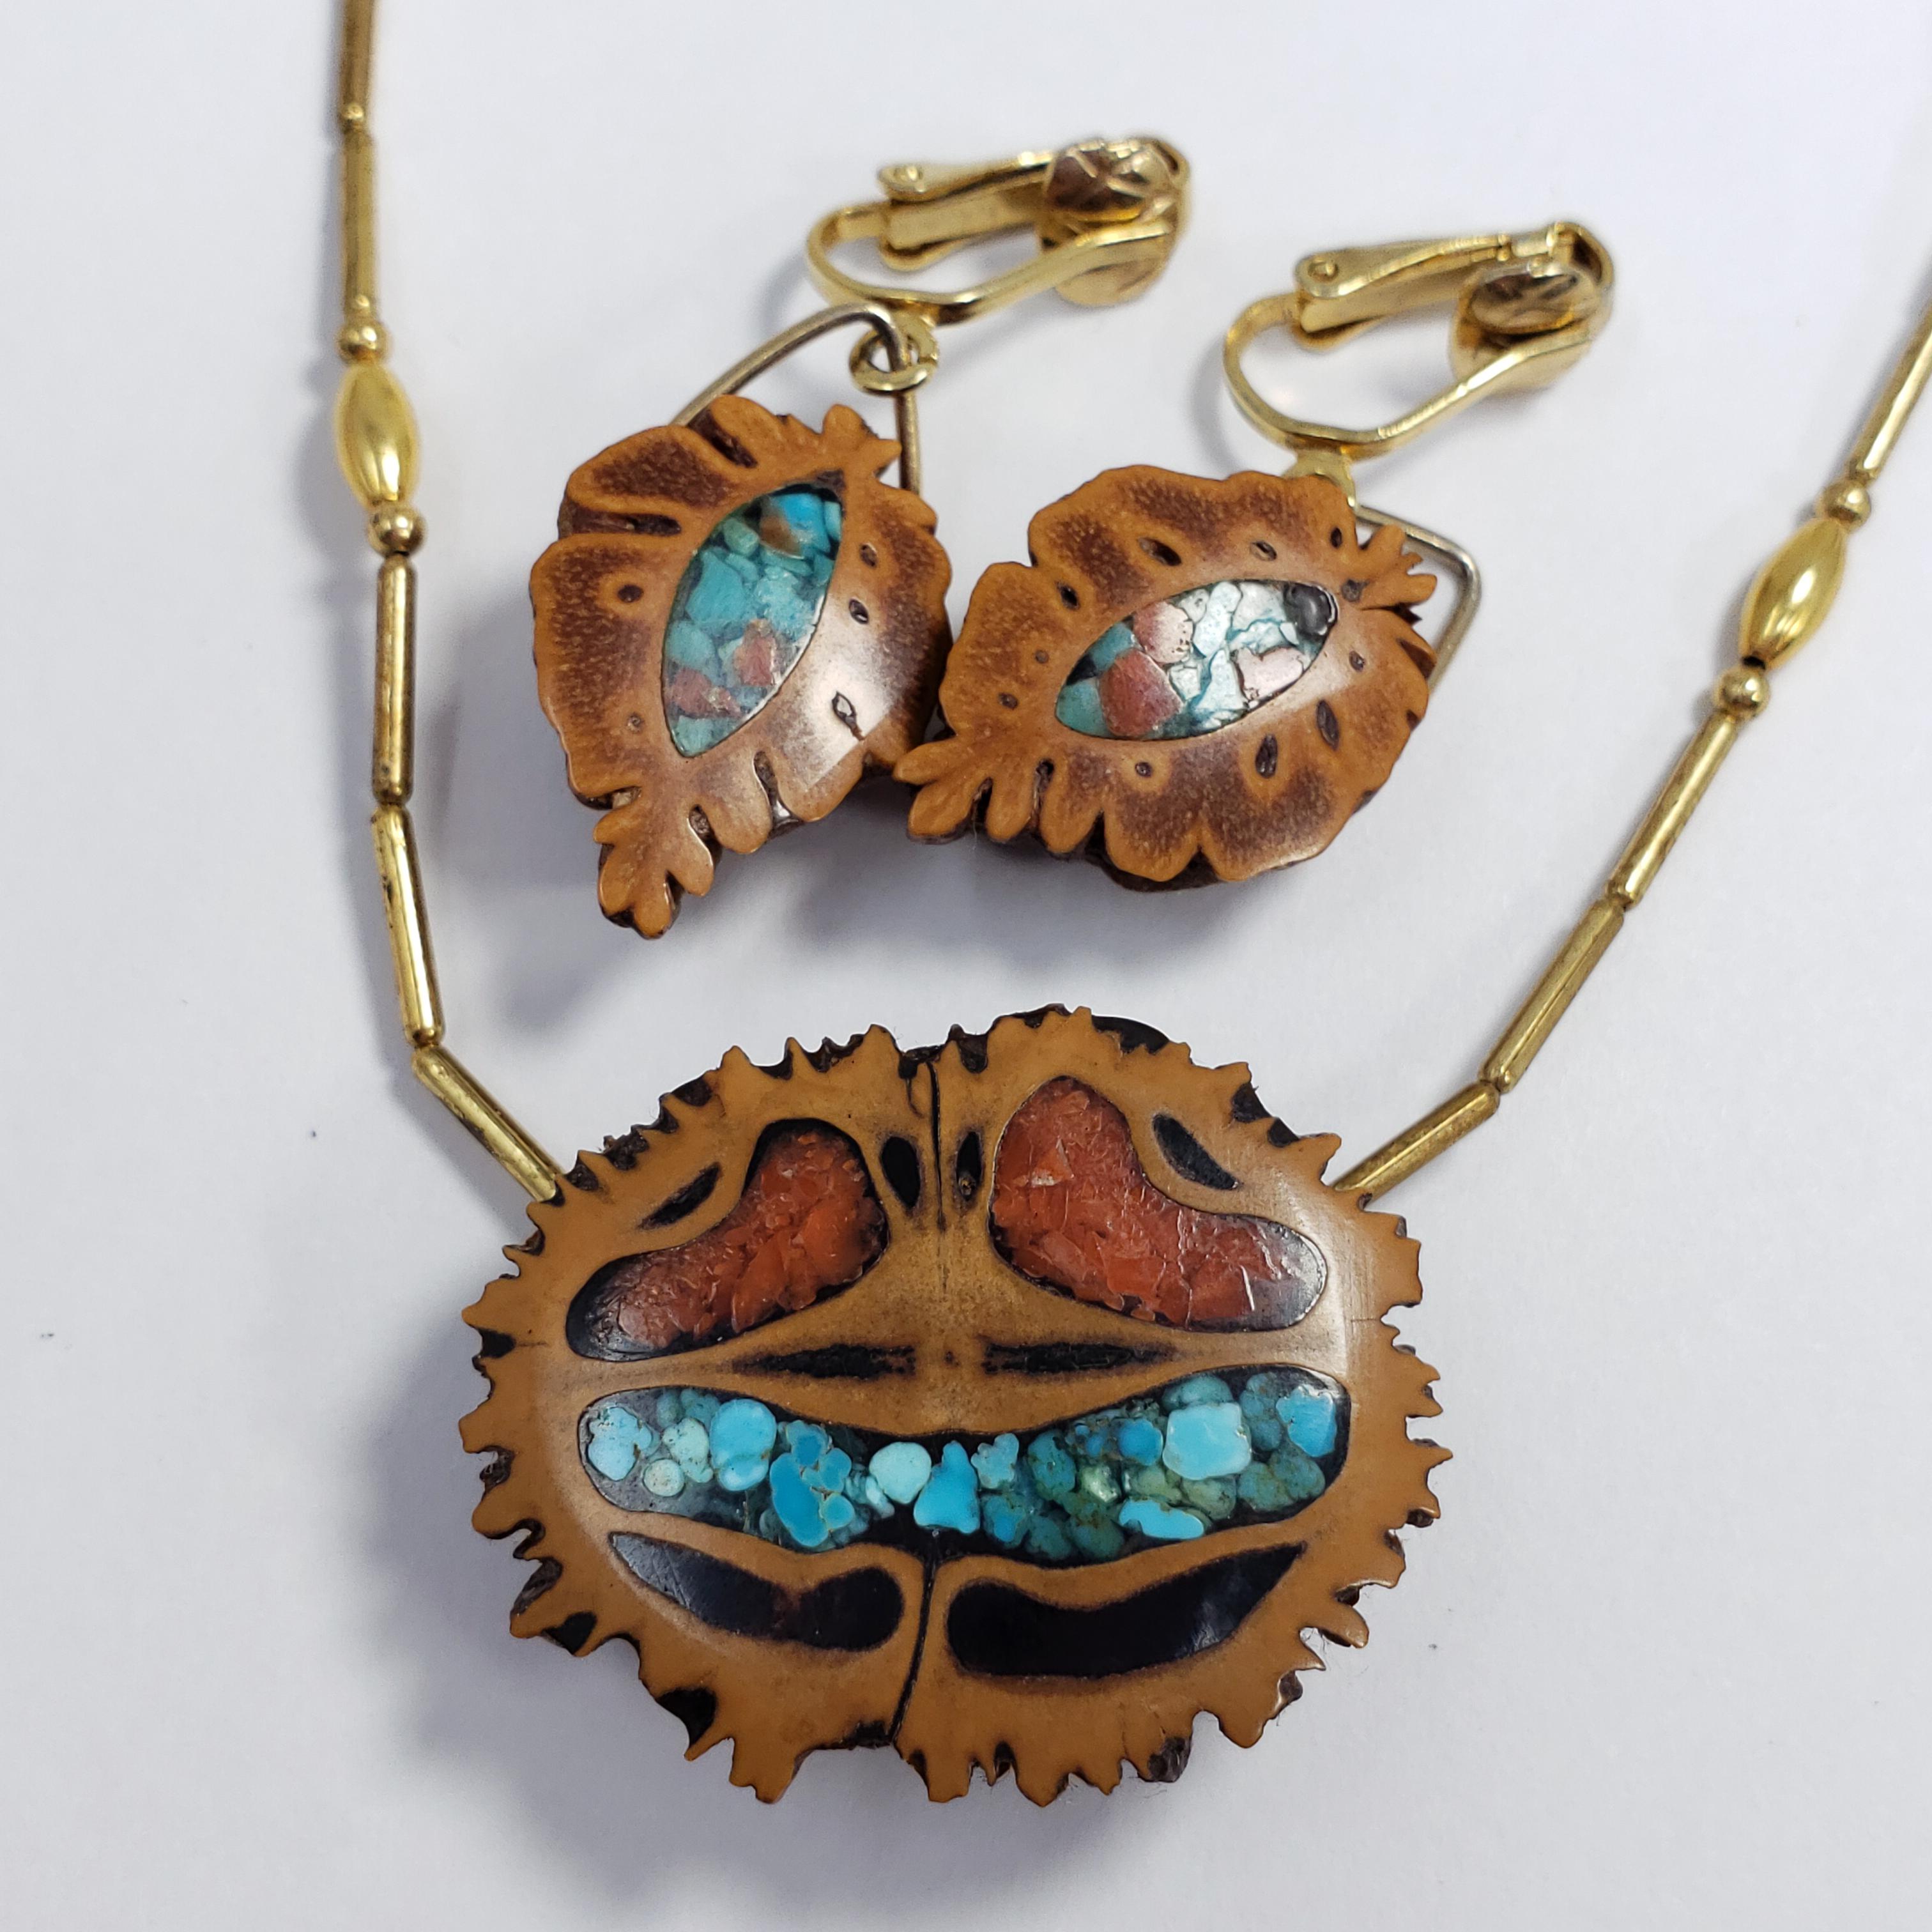 A pendant necklace and pair of earrings in a stylish design. The necklace features a walnut pendant decorated with coral, and turquoise-accents, with a gold-tone bar chain. The clip on earrings feature a matching design, with goldtone